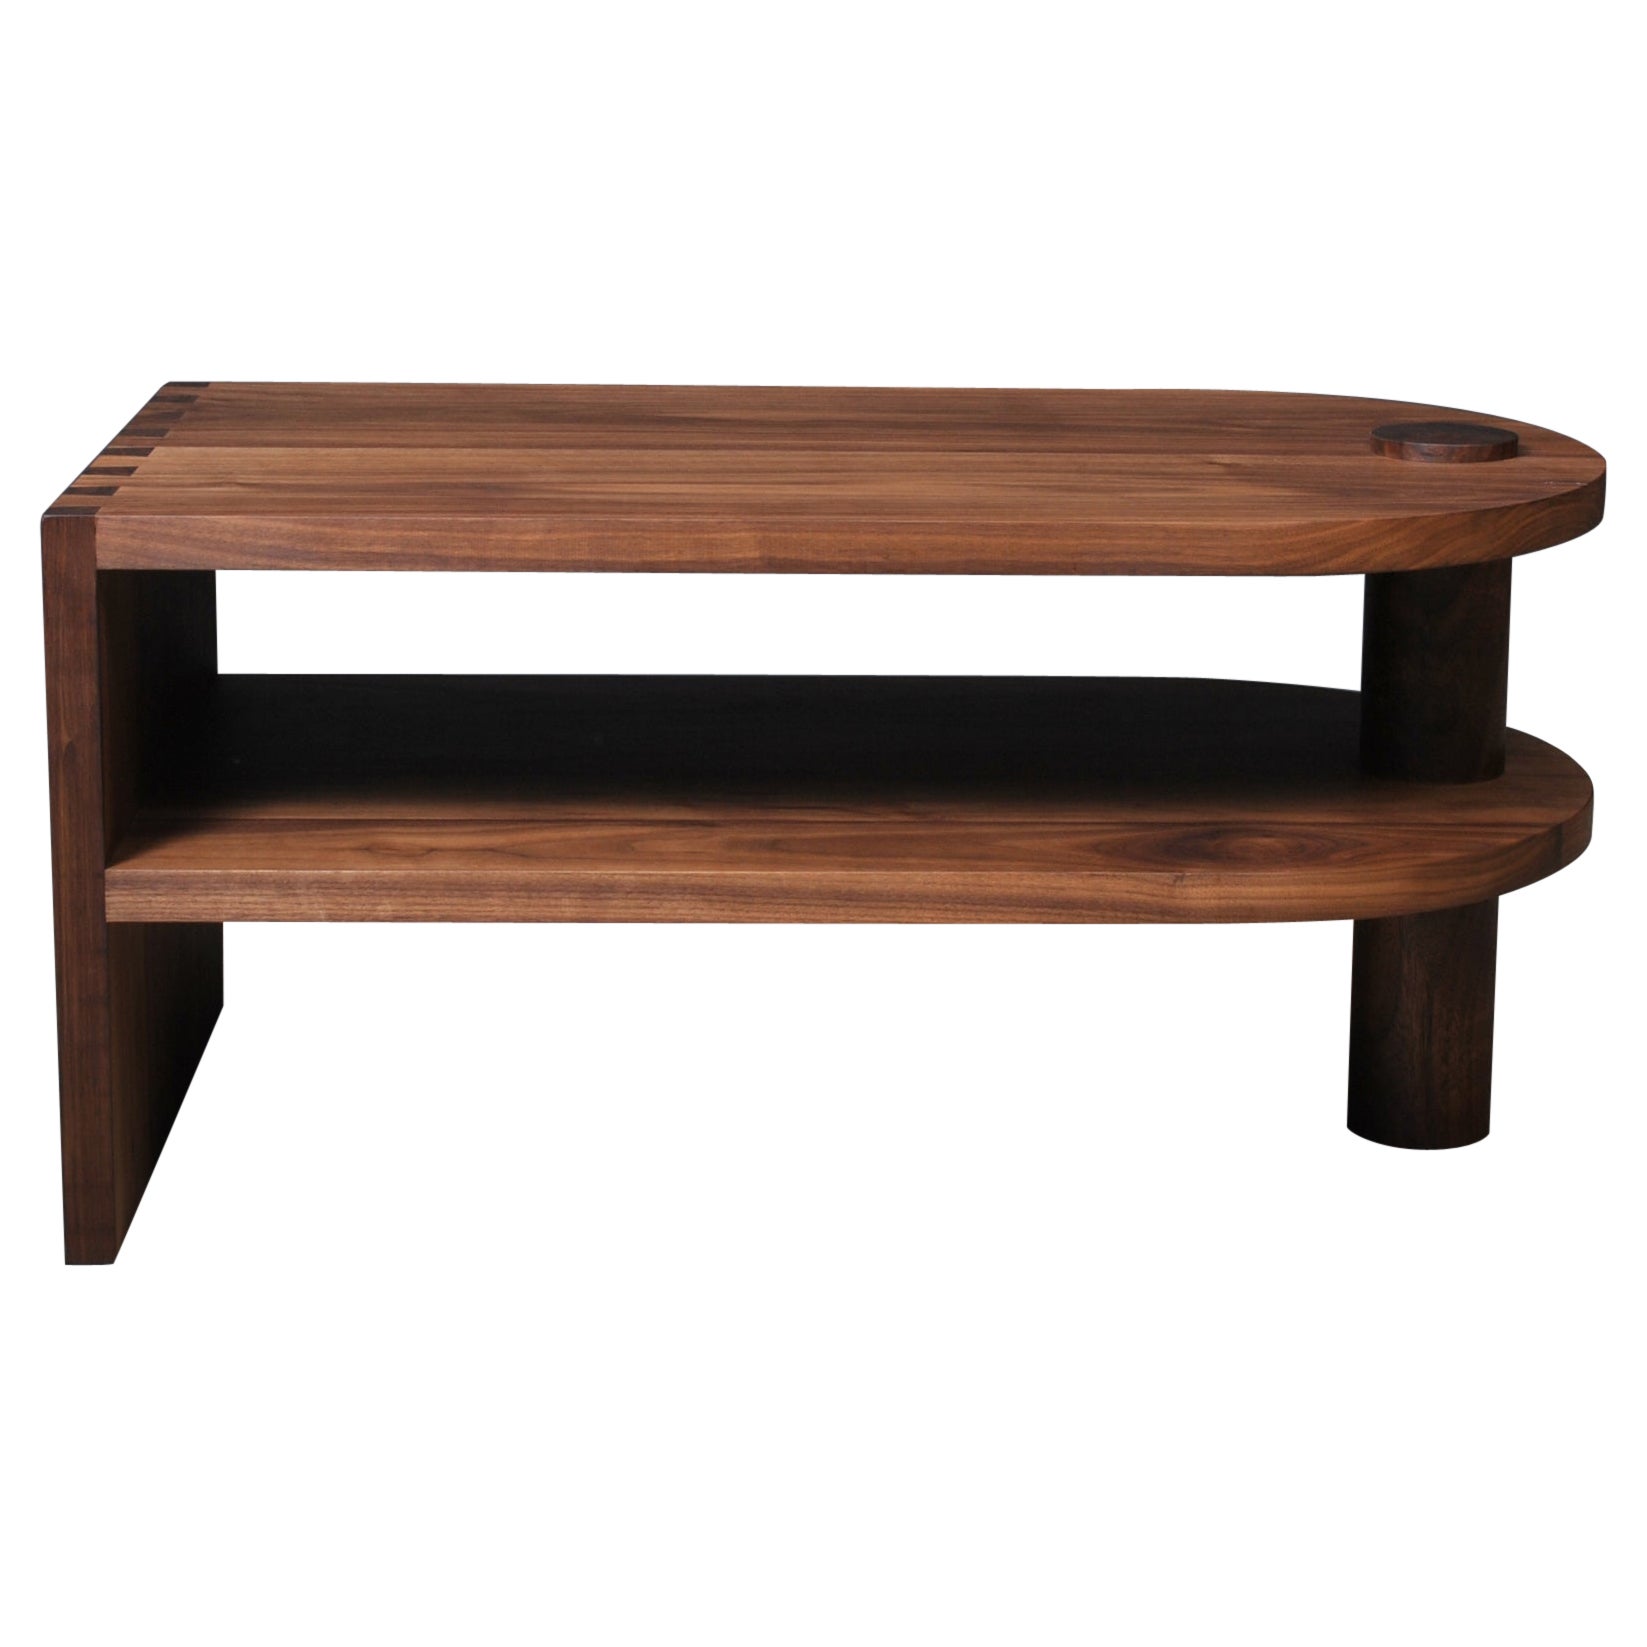 Architectural Handcrafted Walnut Coffee Table